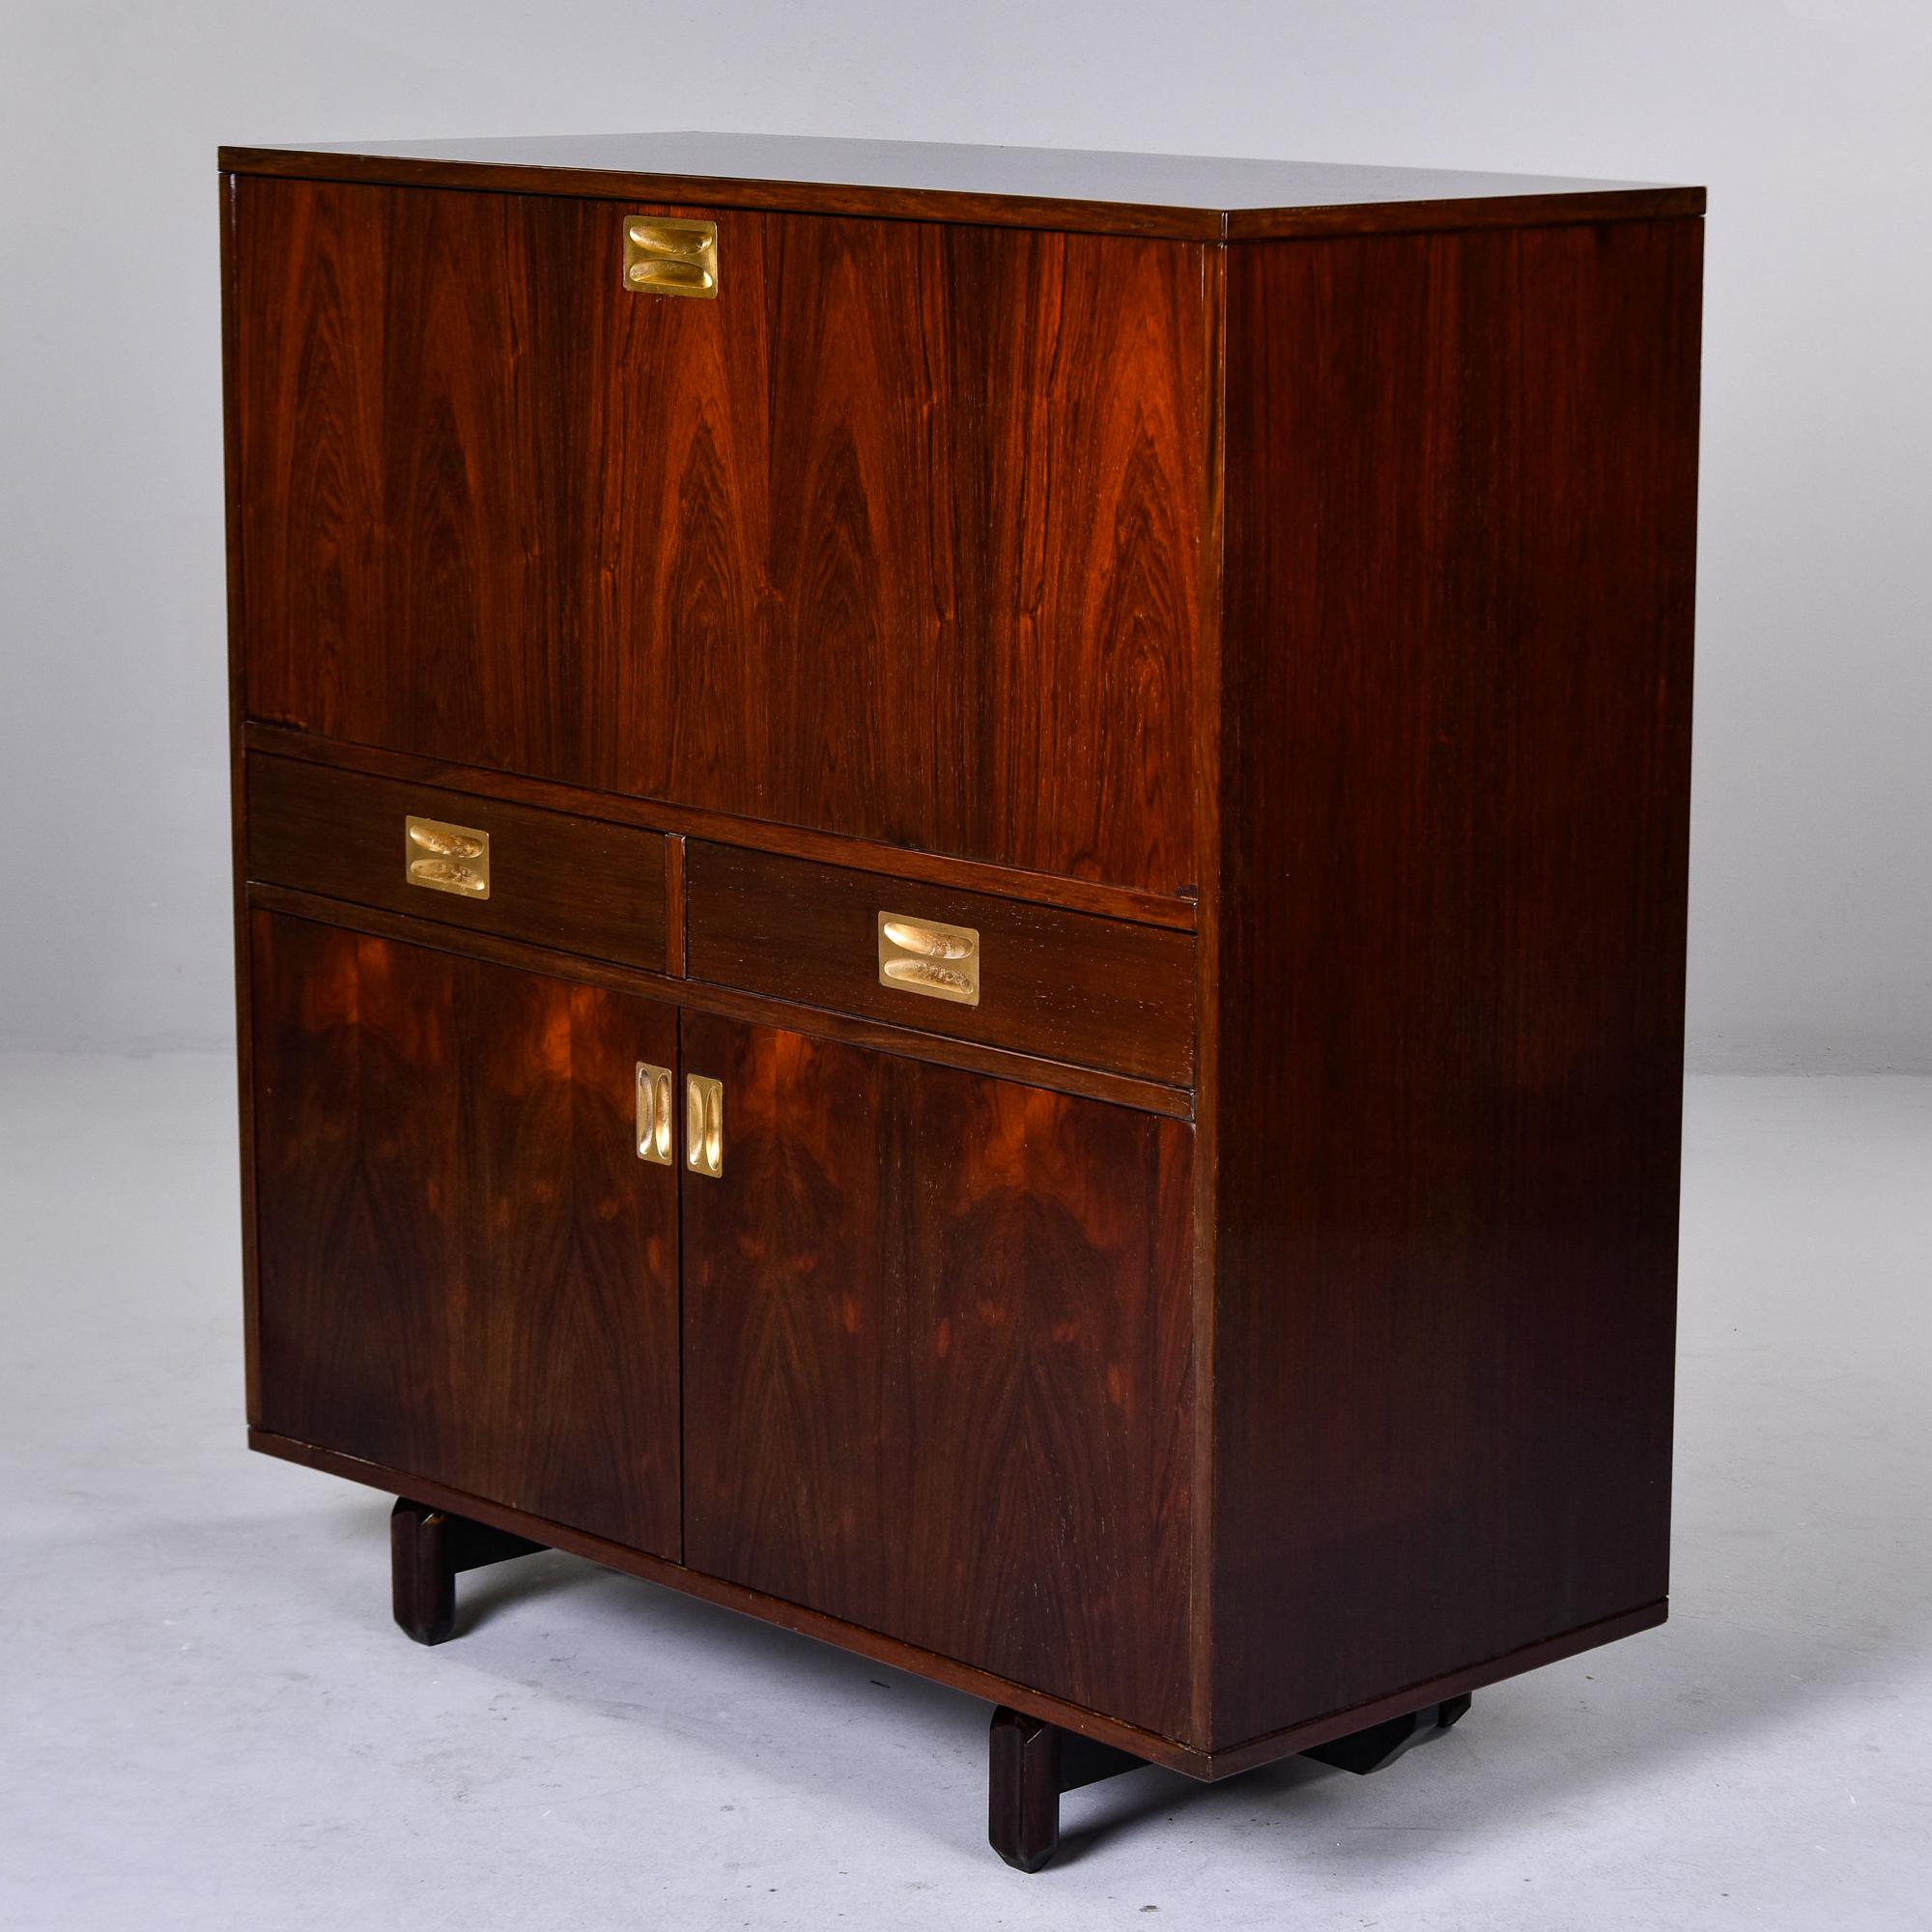 Found in France, this piece piece dates from the 1960s and can be used as a dry bar cabinet or secretary desk. Covered in dark mahogany veneer with brass hardware, this cabinet features a drop down desk or work surface with divided storage, two